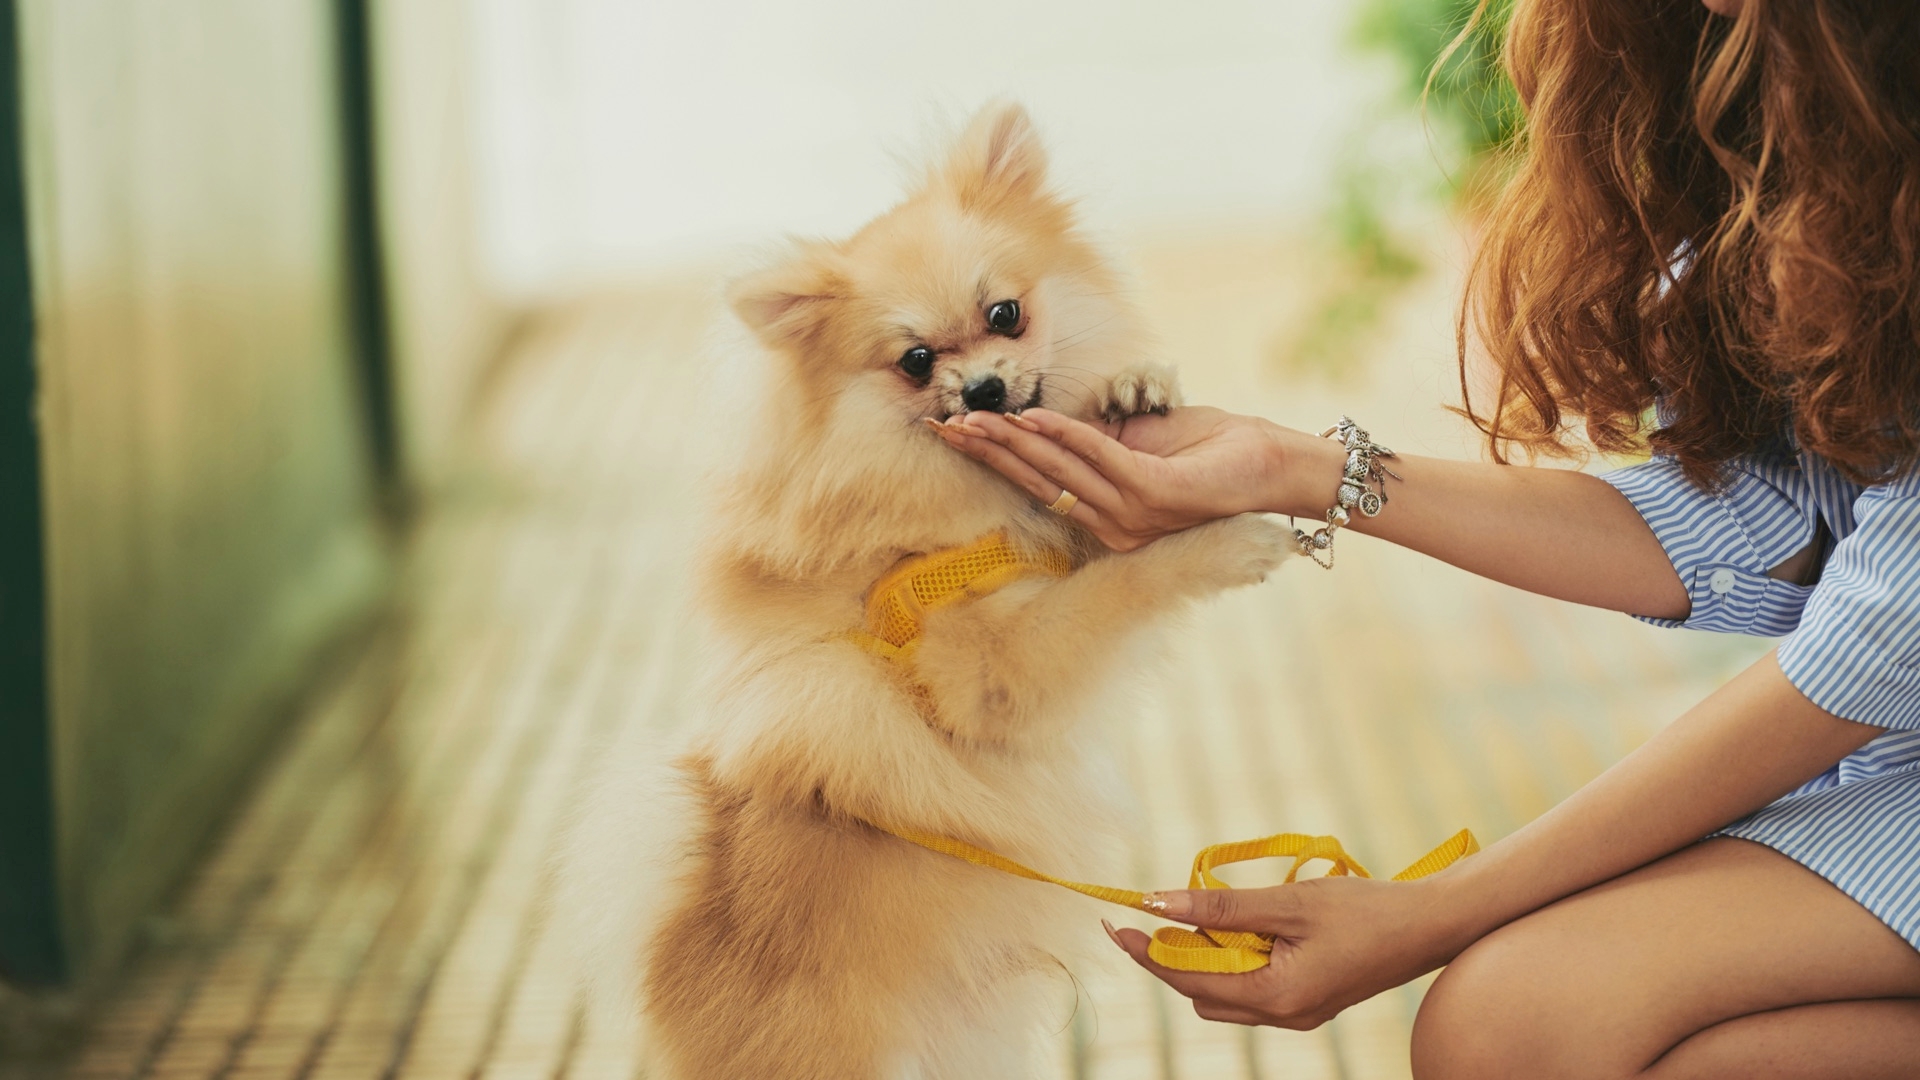 Positive Reinforcement, Training Your Dog Or Cat With Treats And Praise